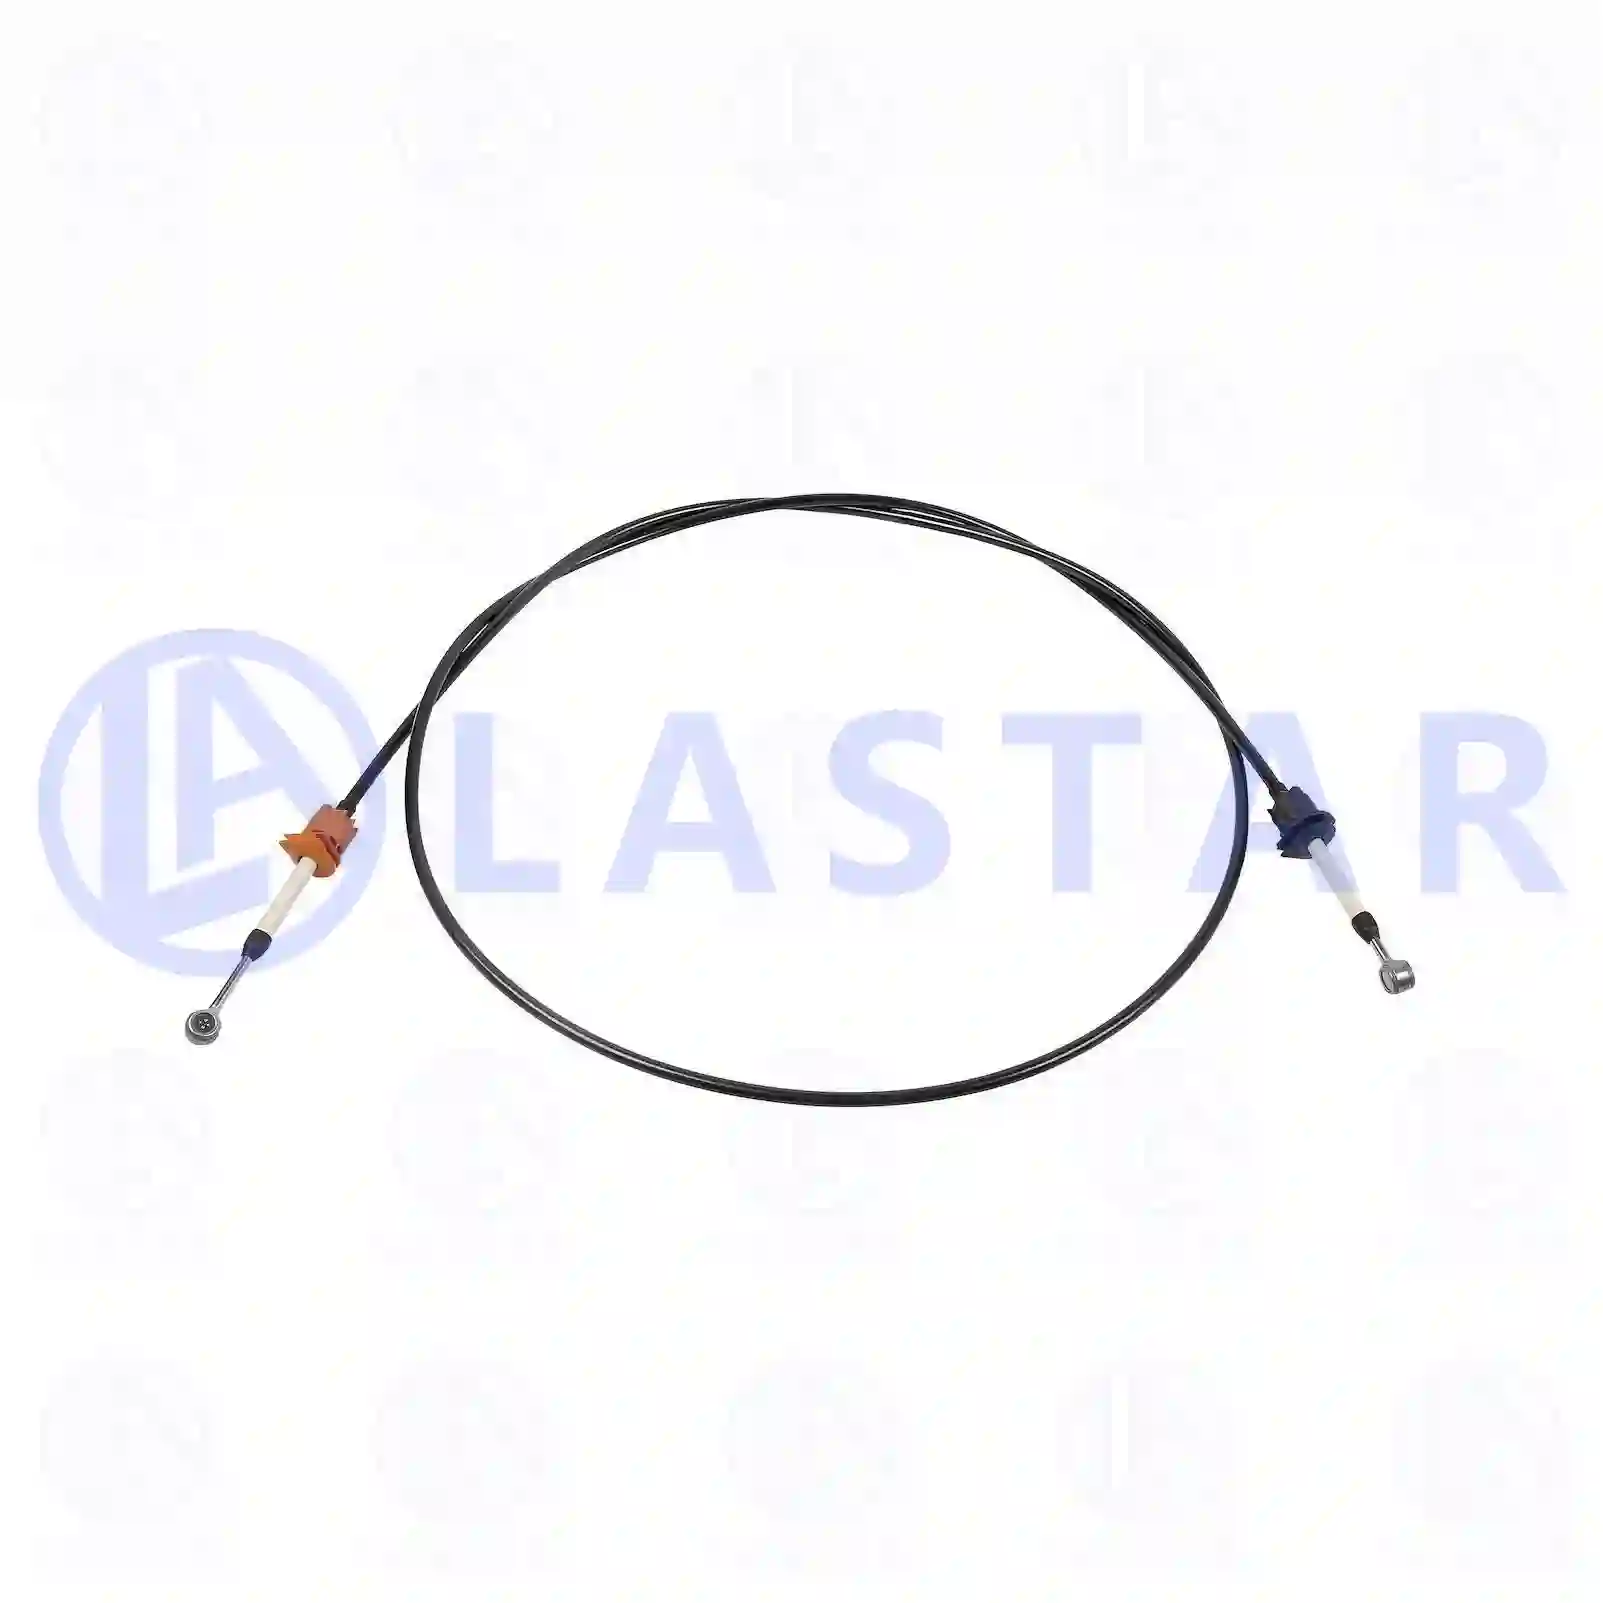 Control cable, switching, 77732704, 20545972, 20700972, 21002872, 21343572, 21789696 ||  77732704 Lastar Spare Part | Truck Spare Parts, Auotomotive Spare Parts Control cable, switching, 77732704, 20545972, 20700972, 21002872, 21343572, 21789696 ||  77732704 Lastar Spare Part | Truck Spare Parts, Auotomotive Spare Parts